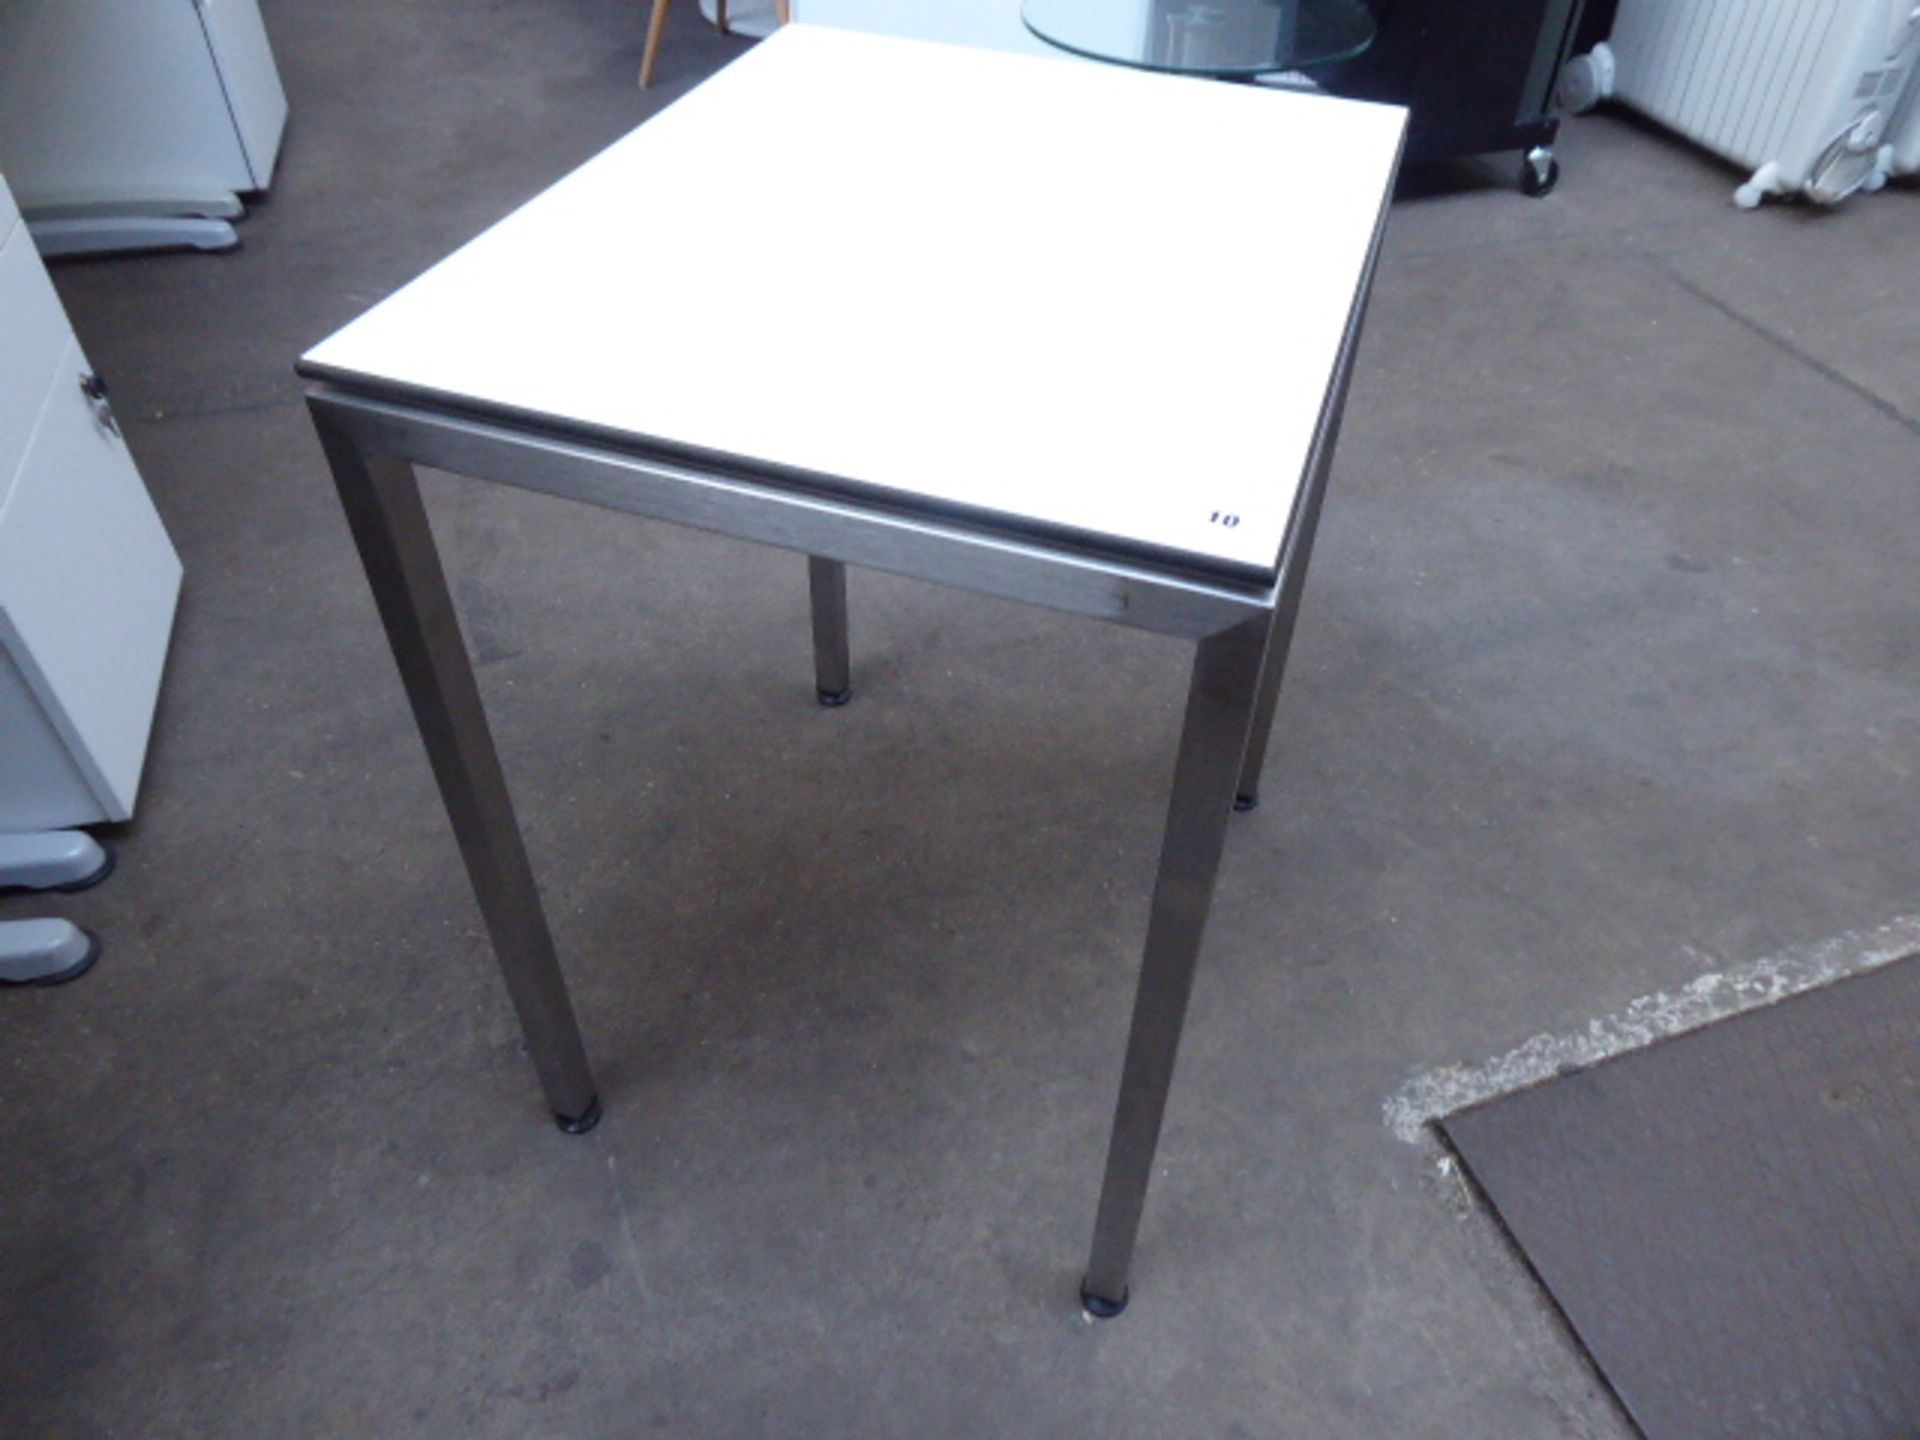 Stack of 6 stainless steel and white top 60cm x 50cm rectangular stackable tables suitable for - Image 2 of 2